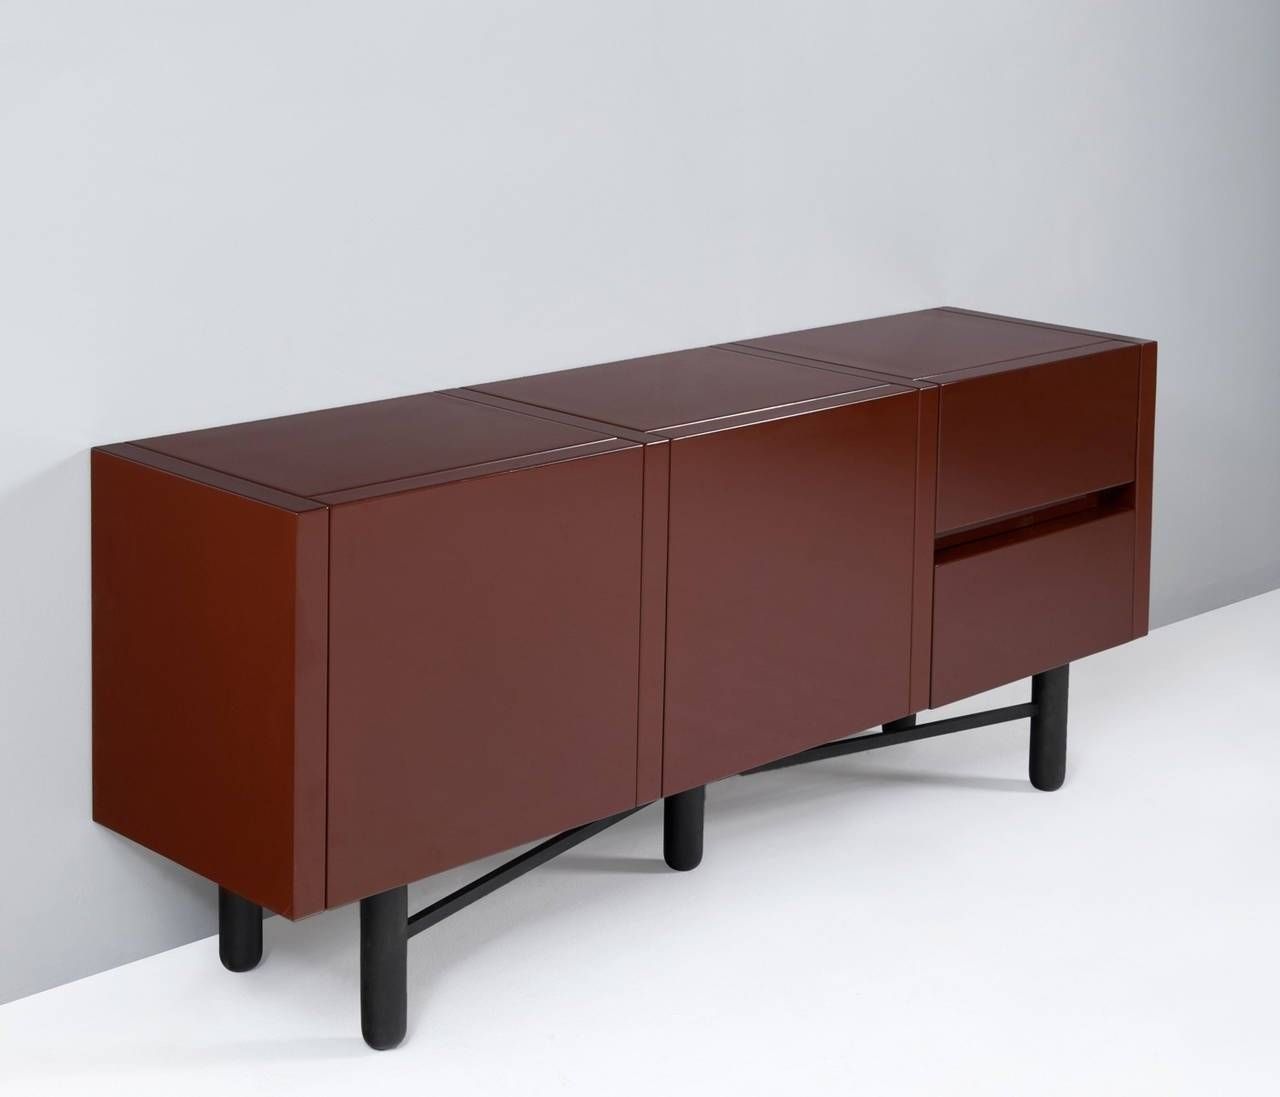 Roche Bobois Red Lacquered High Gloss Sideboard For Sale At 1stdibs Throughout Red High Gloss Sideboards (Photo 2 of 30)